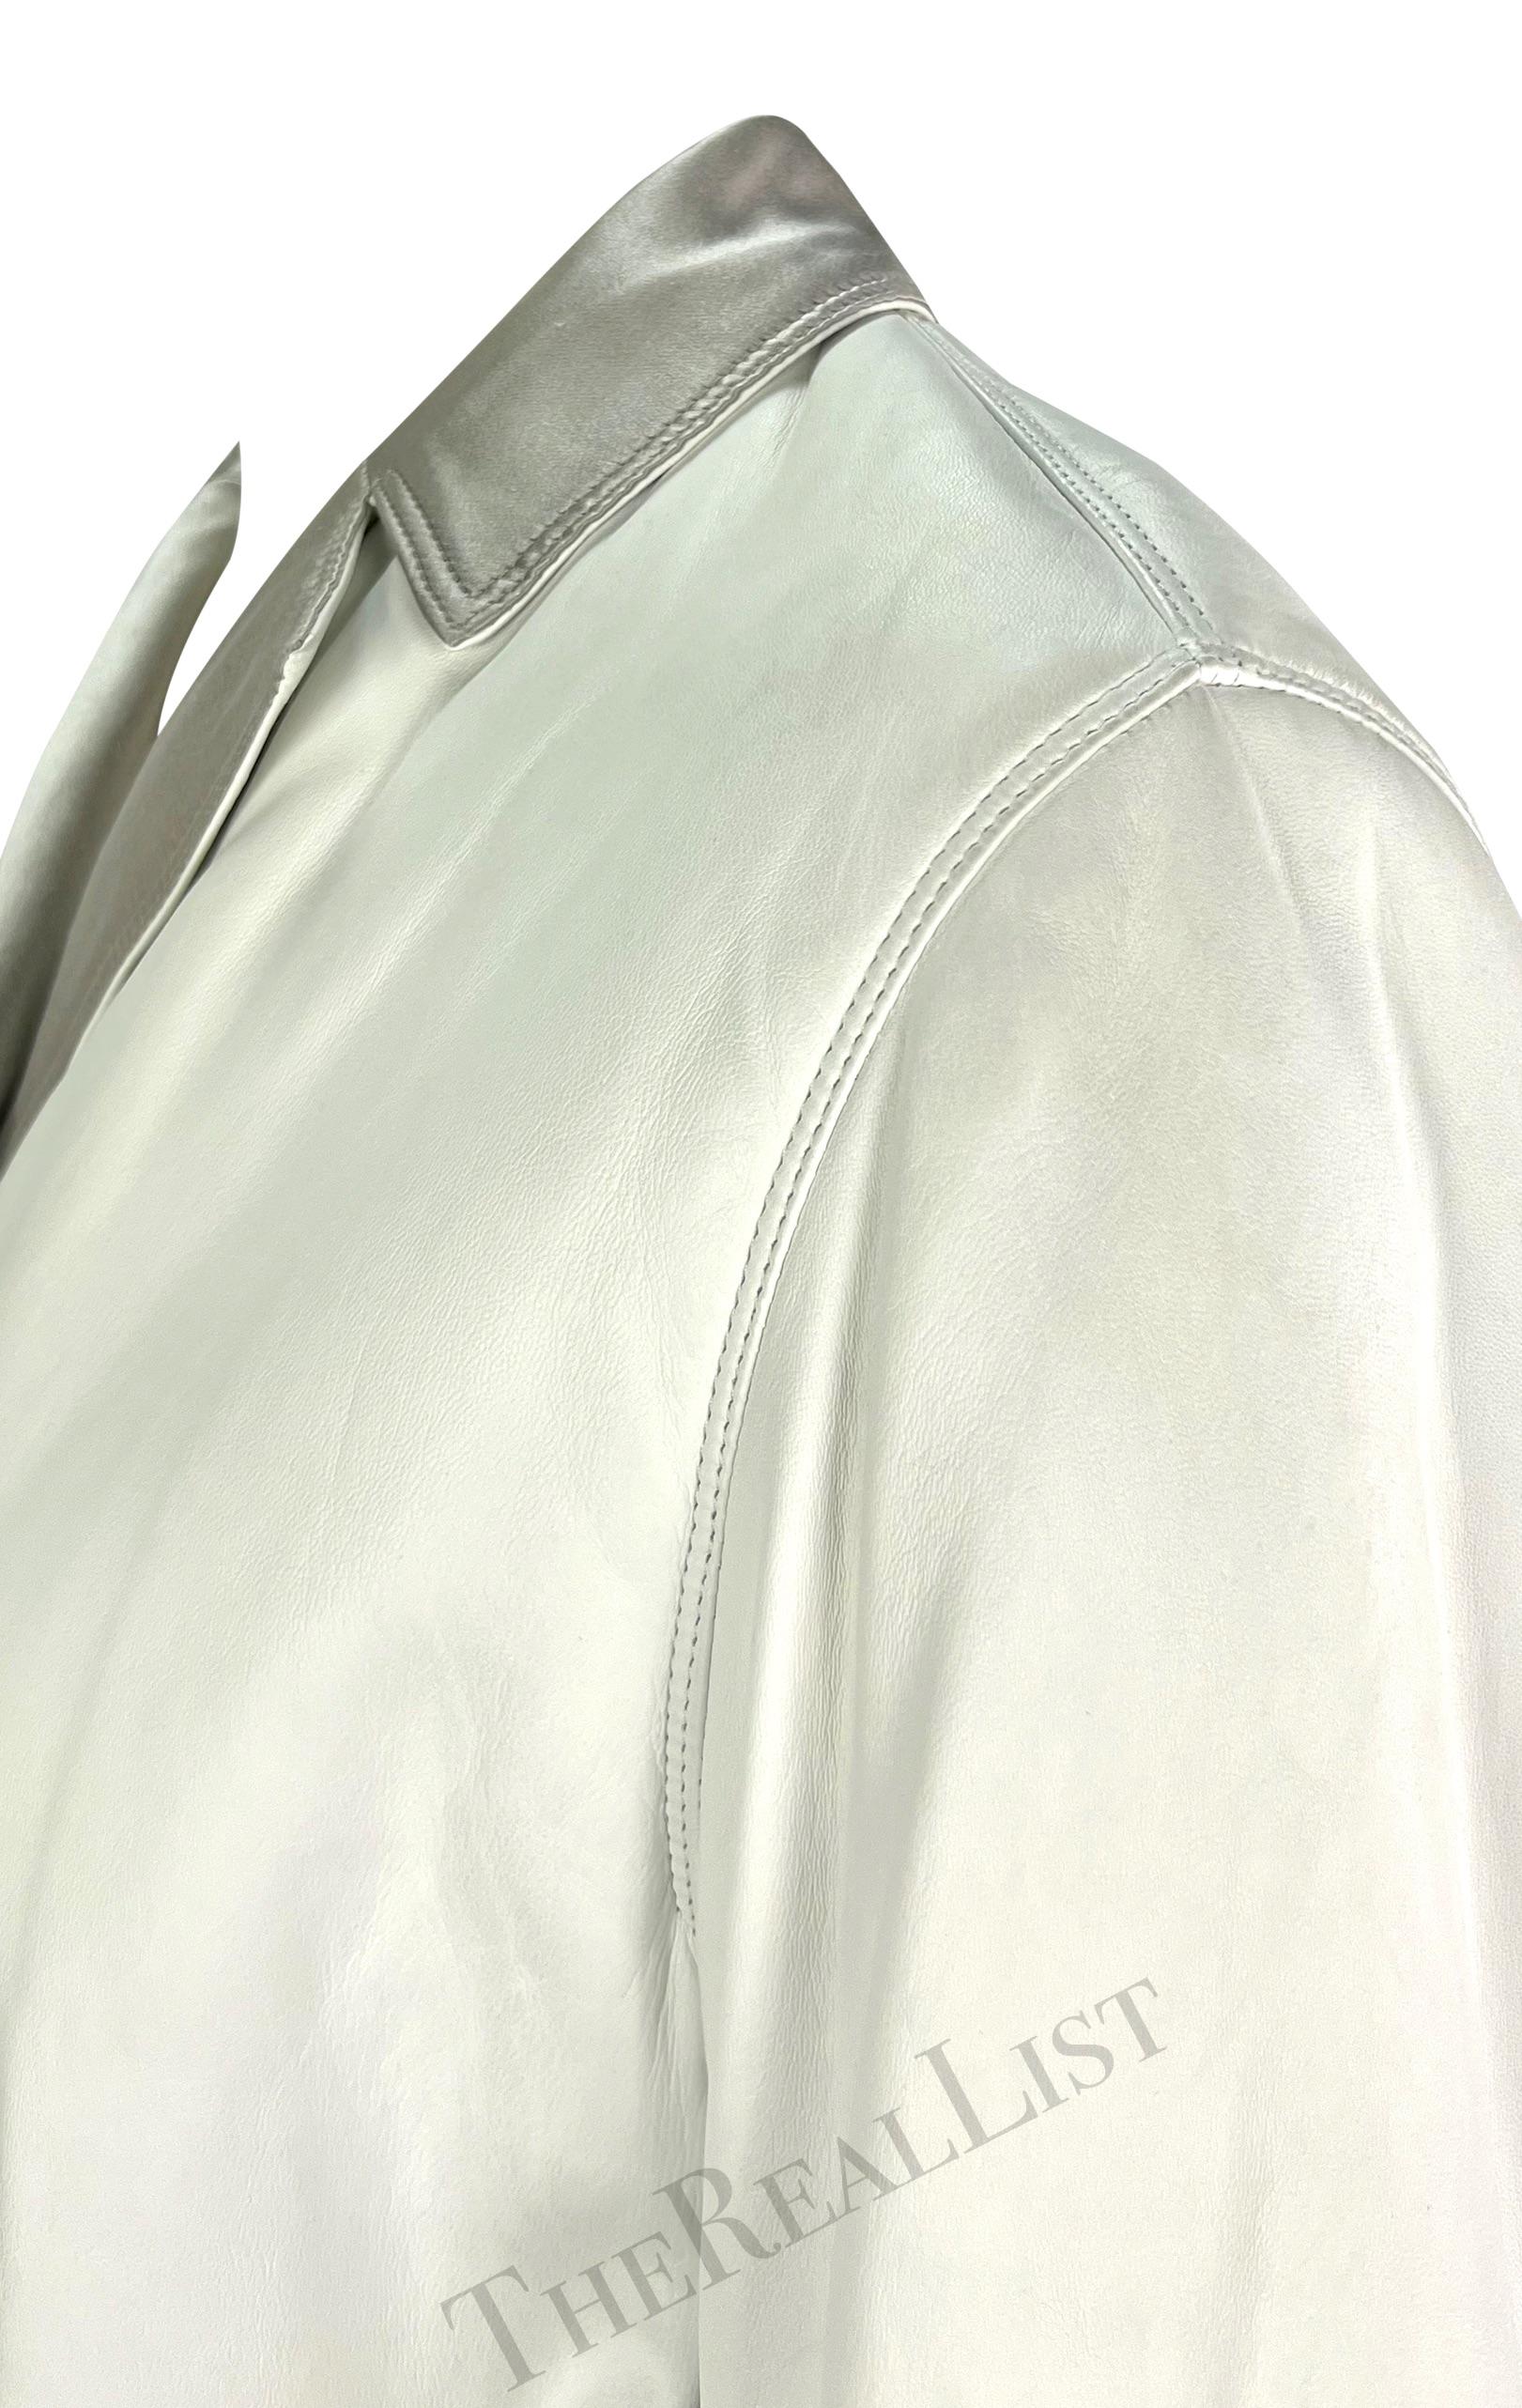 NWT F/W 1995 Gianni Versace Runway White Leather Silver Satin Medusa Car Coat For Sale 8